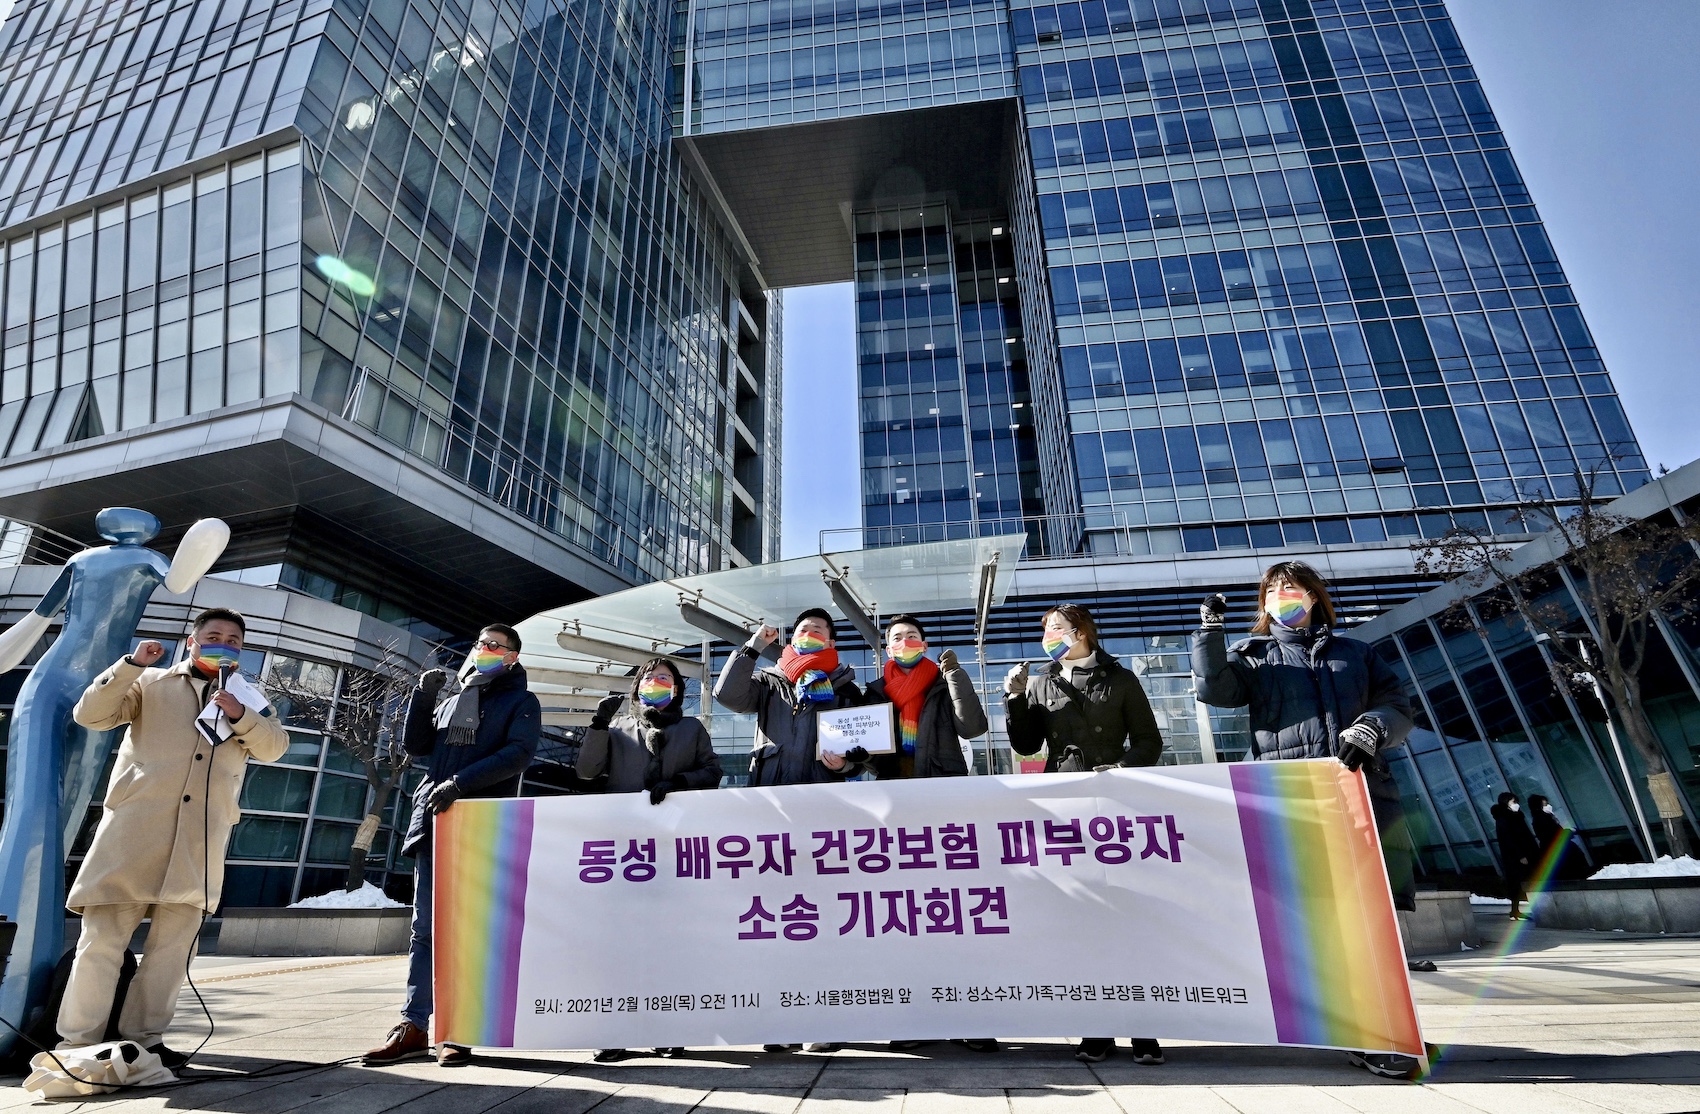 South Korean same-sex couple So Seong-wook (centre L) and Kim Yong-min (centre R) attend a press conference as they file a lawsuit against the National Health Insurance Service for their dependent family status, at the Seoul Administrative Court in Seoul